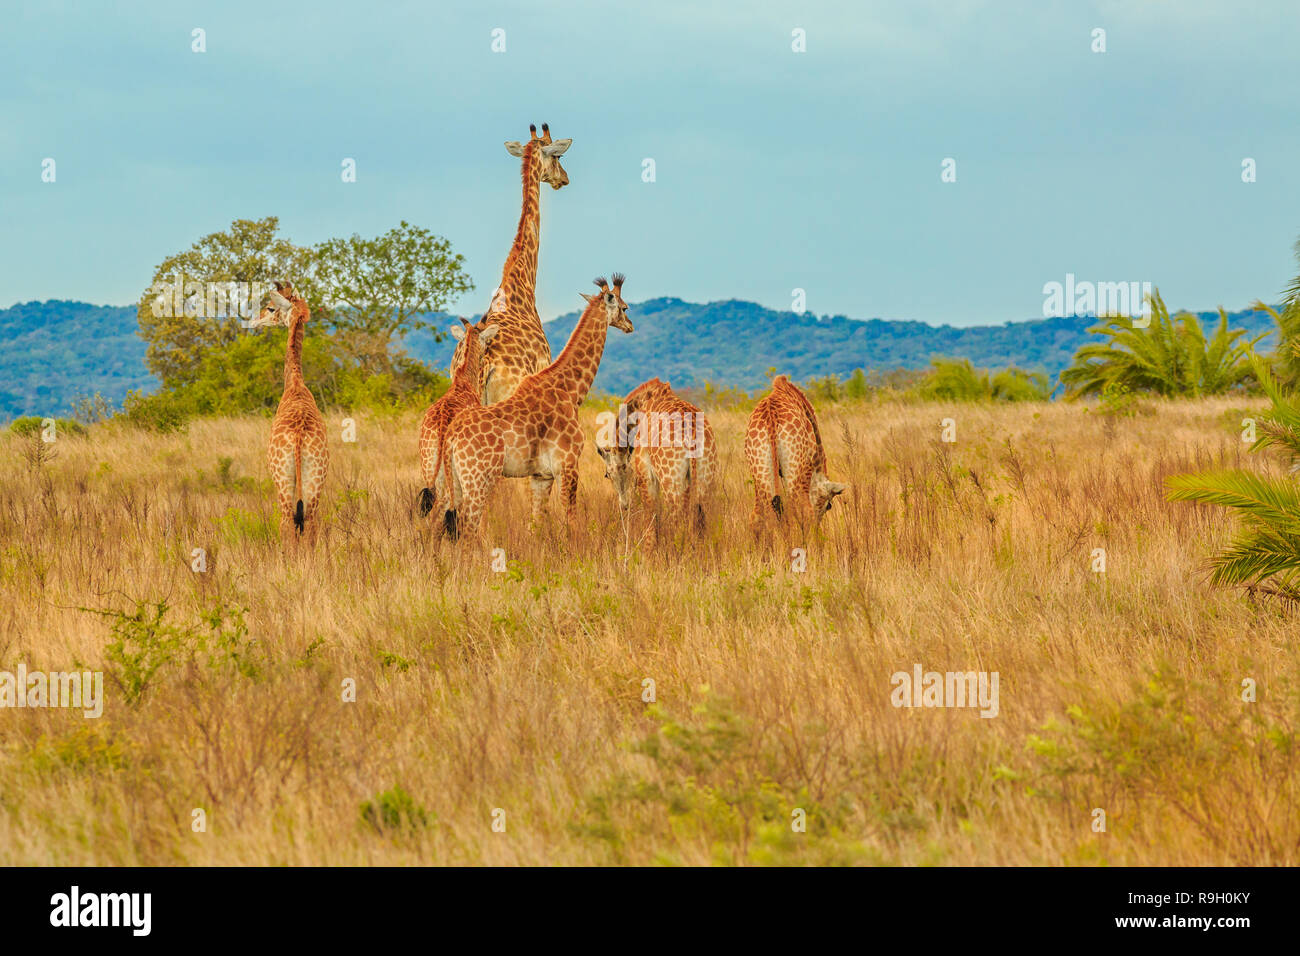 Group of African giraffe walks in iSimangaliso Wetland Park with savannah landscape. South Africa game drive safari. Copy space. Stock Photo